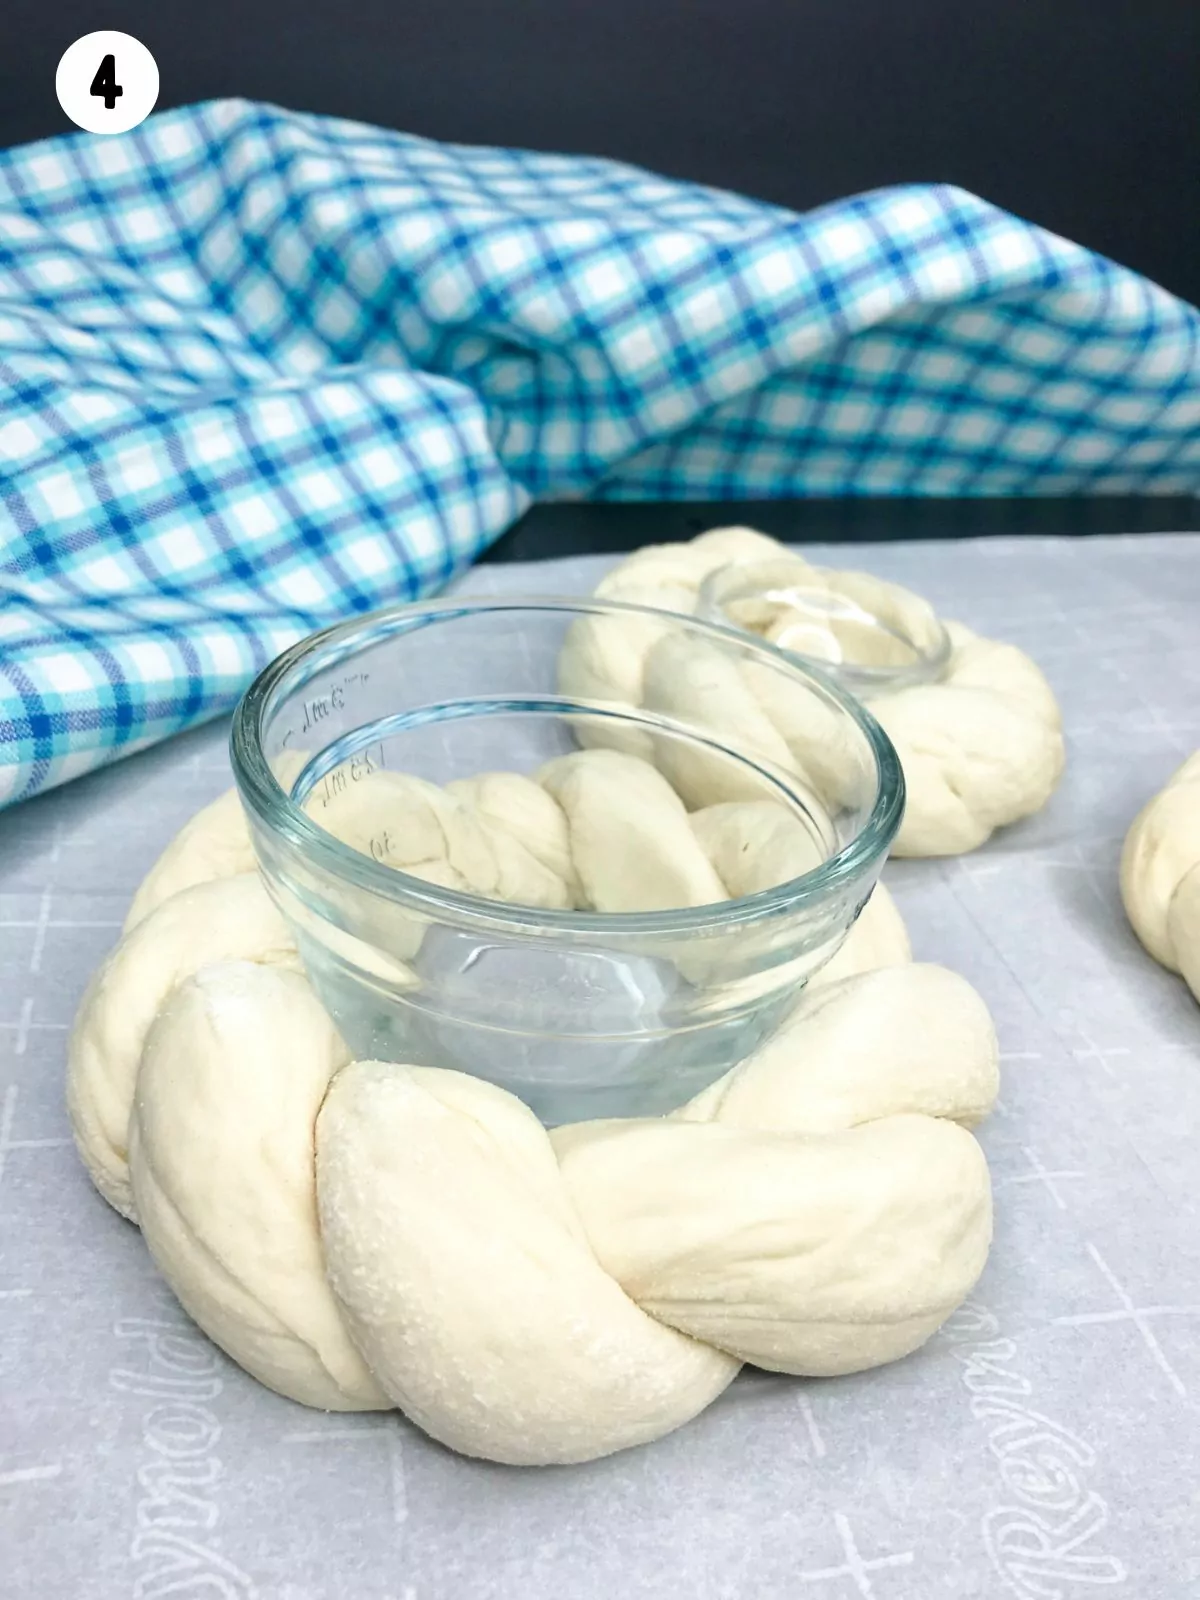 raw dough rings with glass bowls in the center.